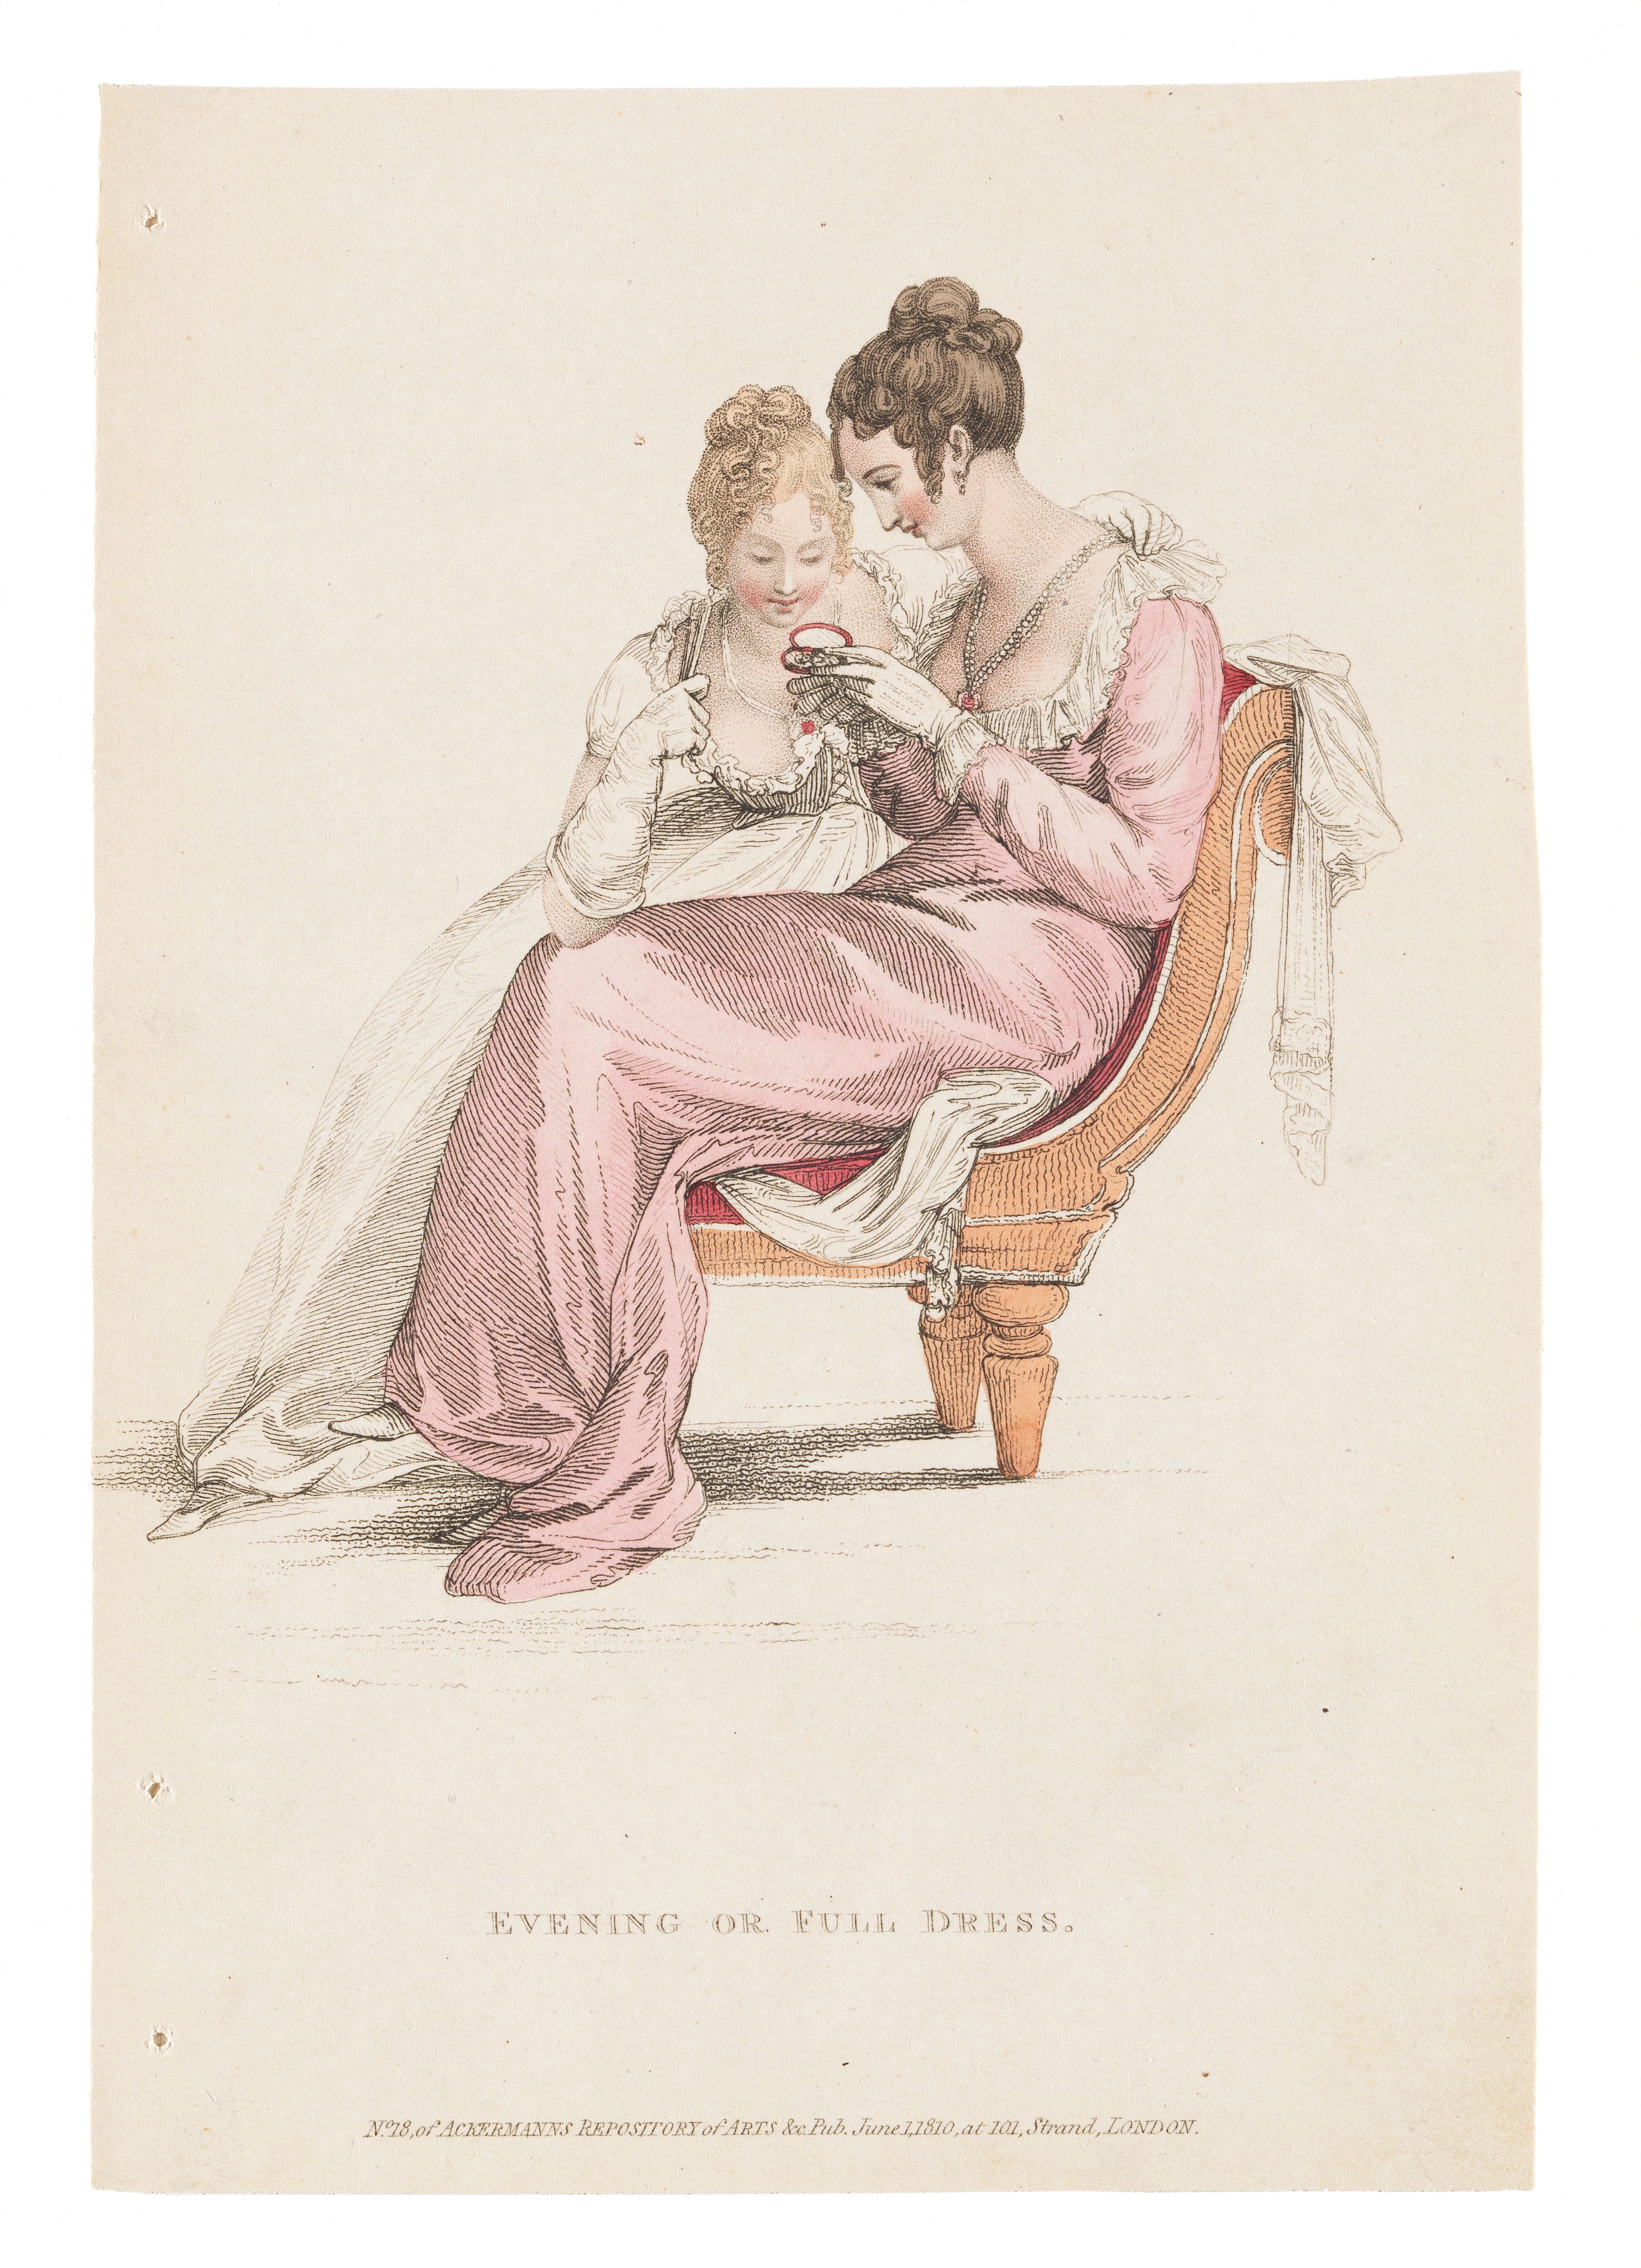 Rudolph Ackermann, Fashion Plate, 'Evening or Full Dress' for 'The Repository of Arts', England, London, June 1, 1810